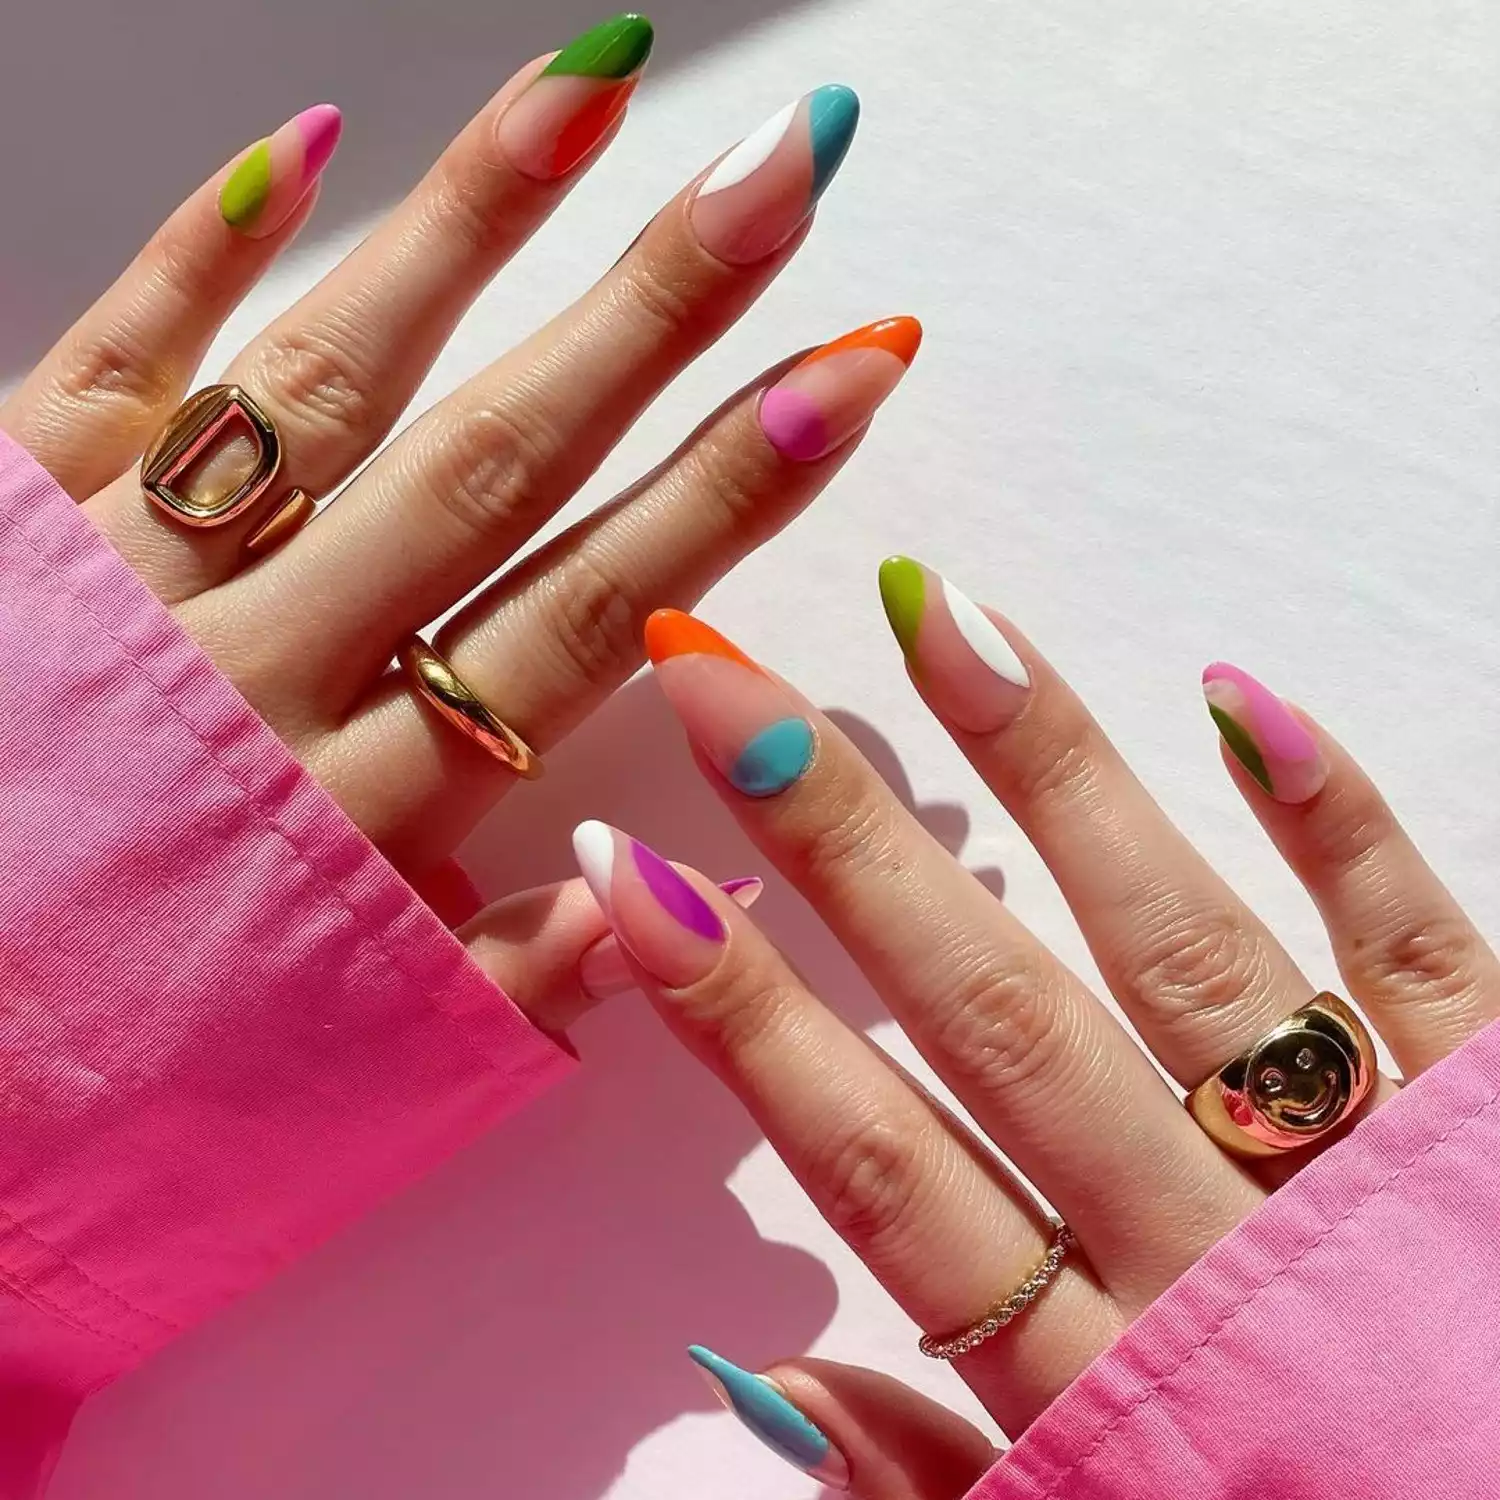 20 March Nail Ideas to Embrace Spring Without Going Full Leprechaun